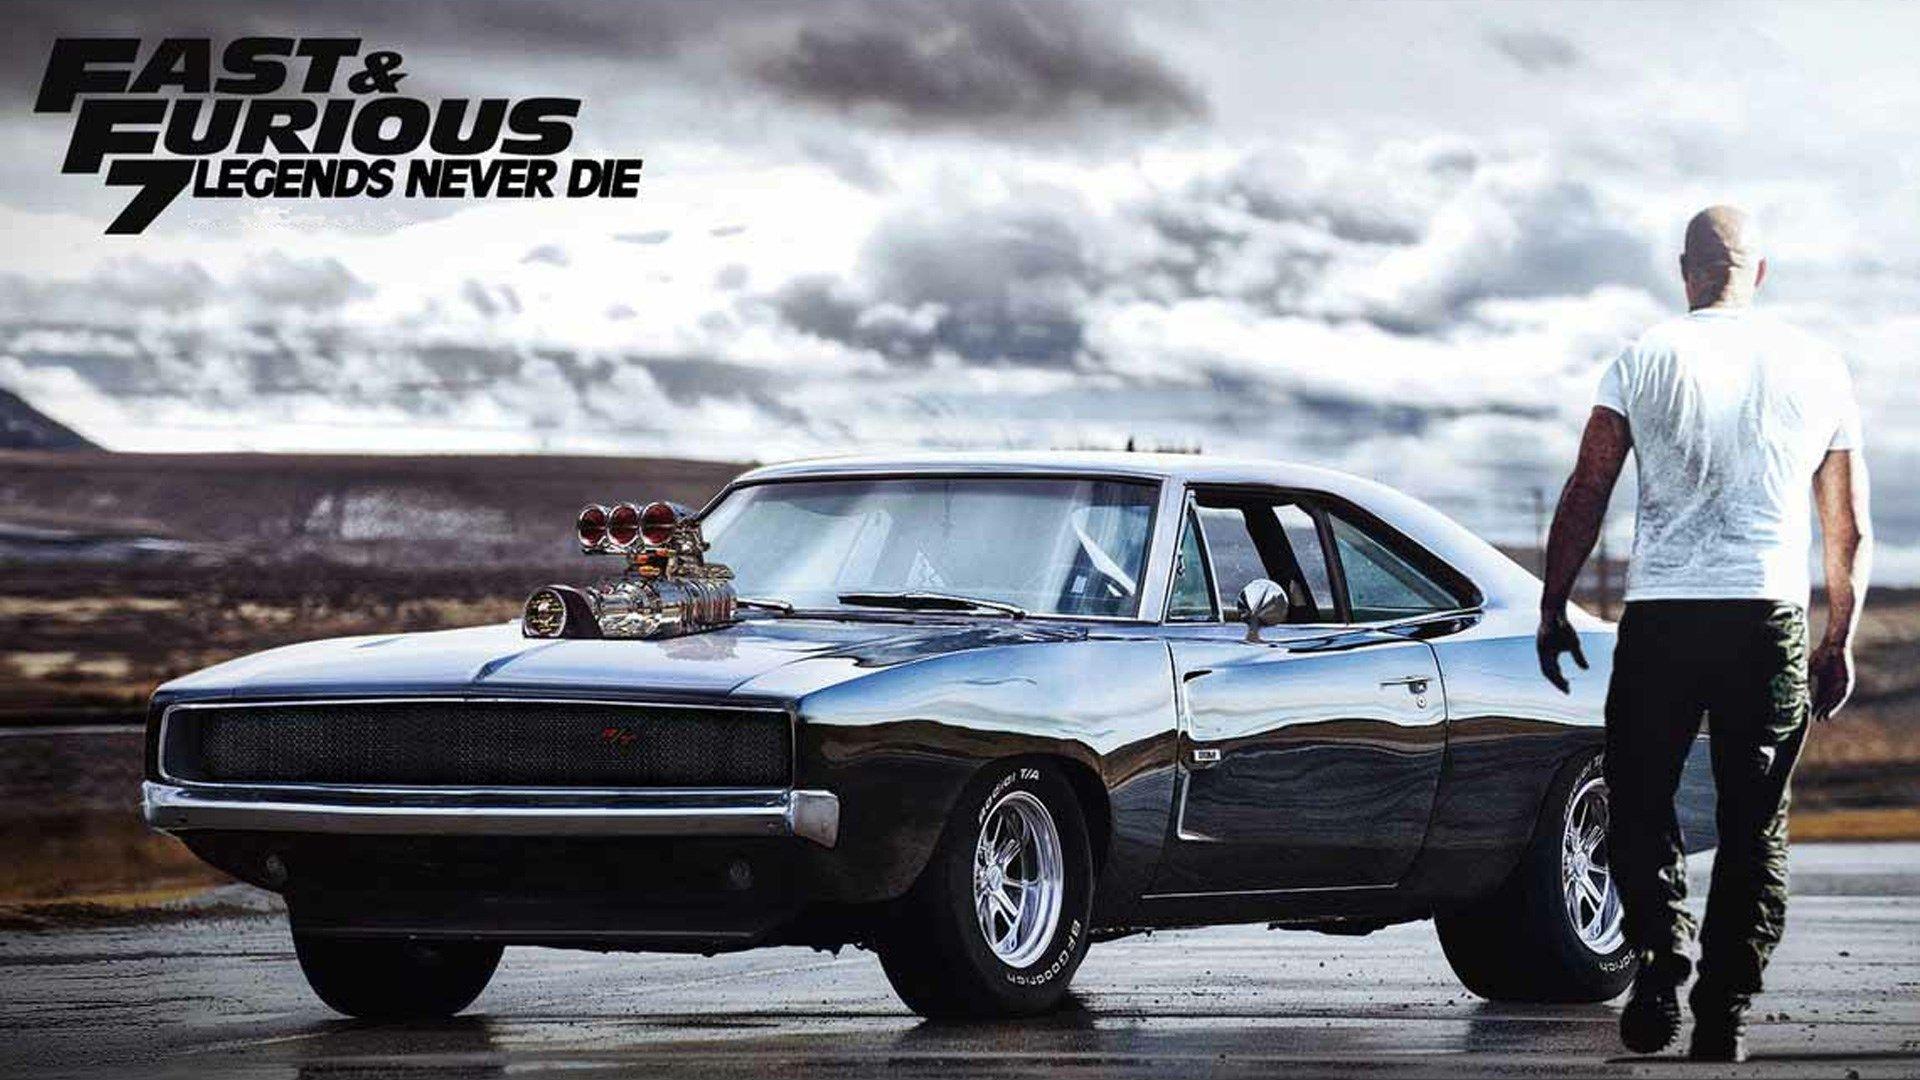 fast furious 7 legends never die 1920x1080 wallpaper. Muscle cars, Fast and furious, Cars movie